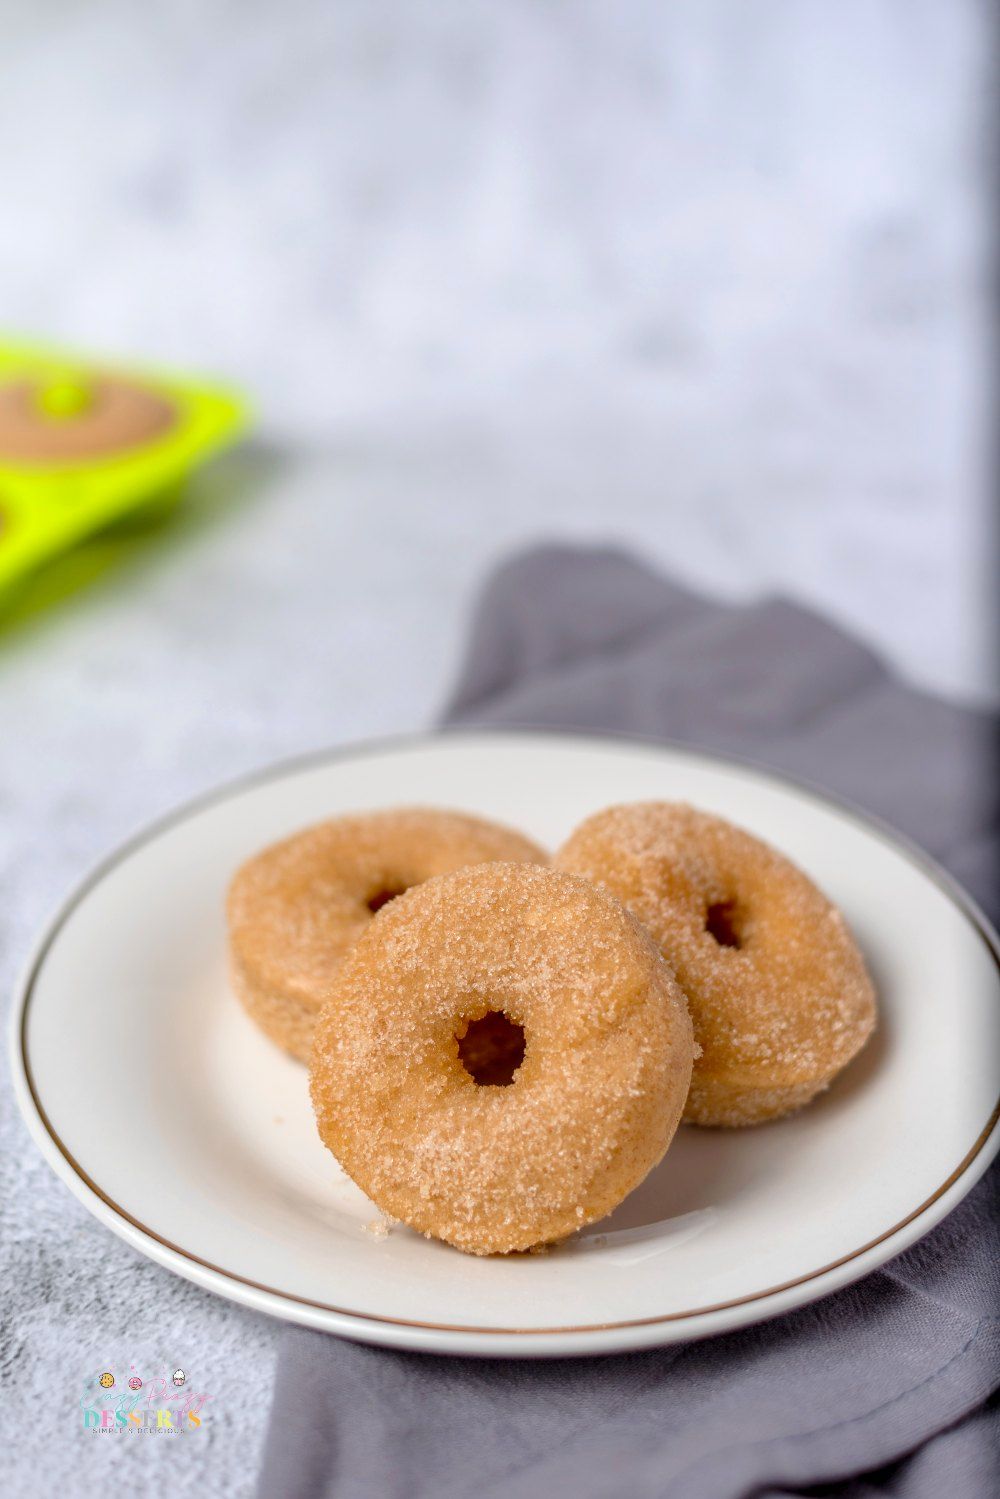 Image of three baked cinnamon donuts on a plate